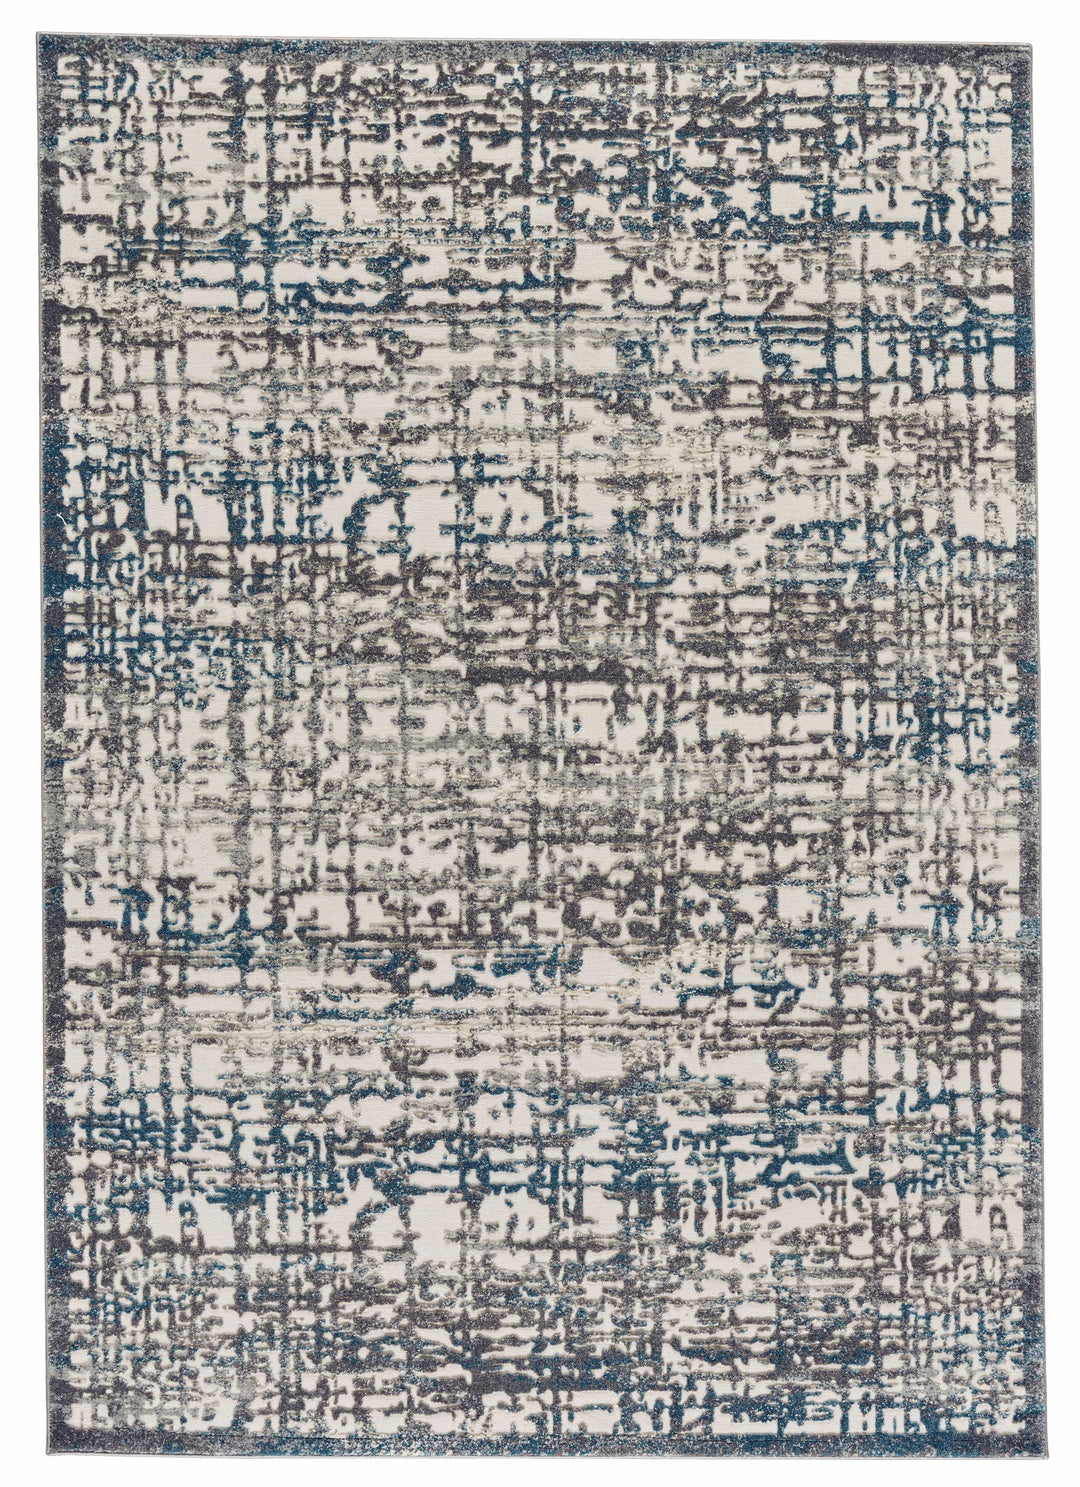 Feizy Feizy Akhari Textured High-Low Rug - Available in 5 Sizes - Deep Teal Blue & Ivory 5' x 8' 6713677FGRYTQSE10